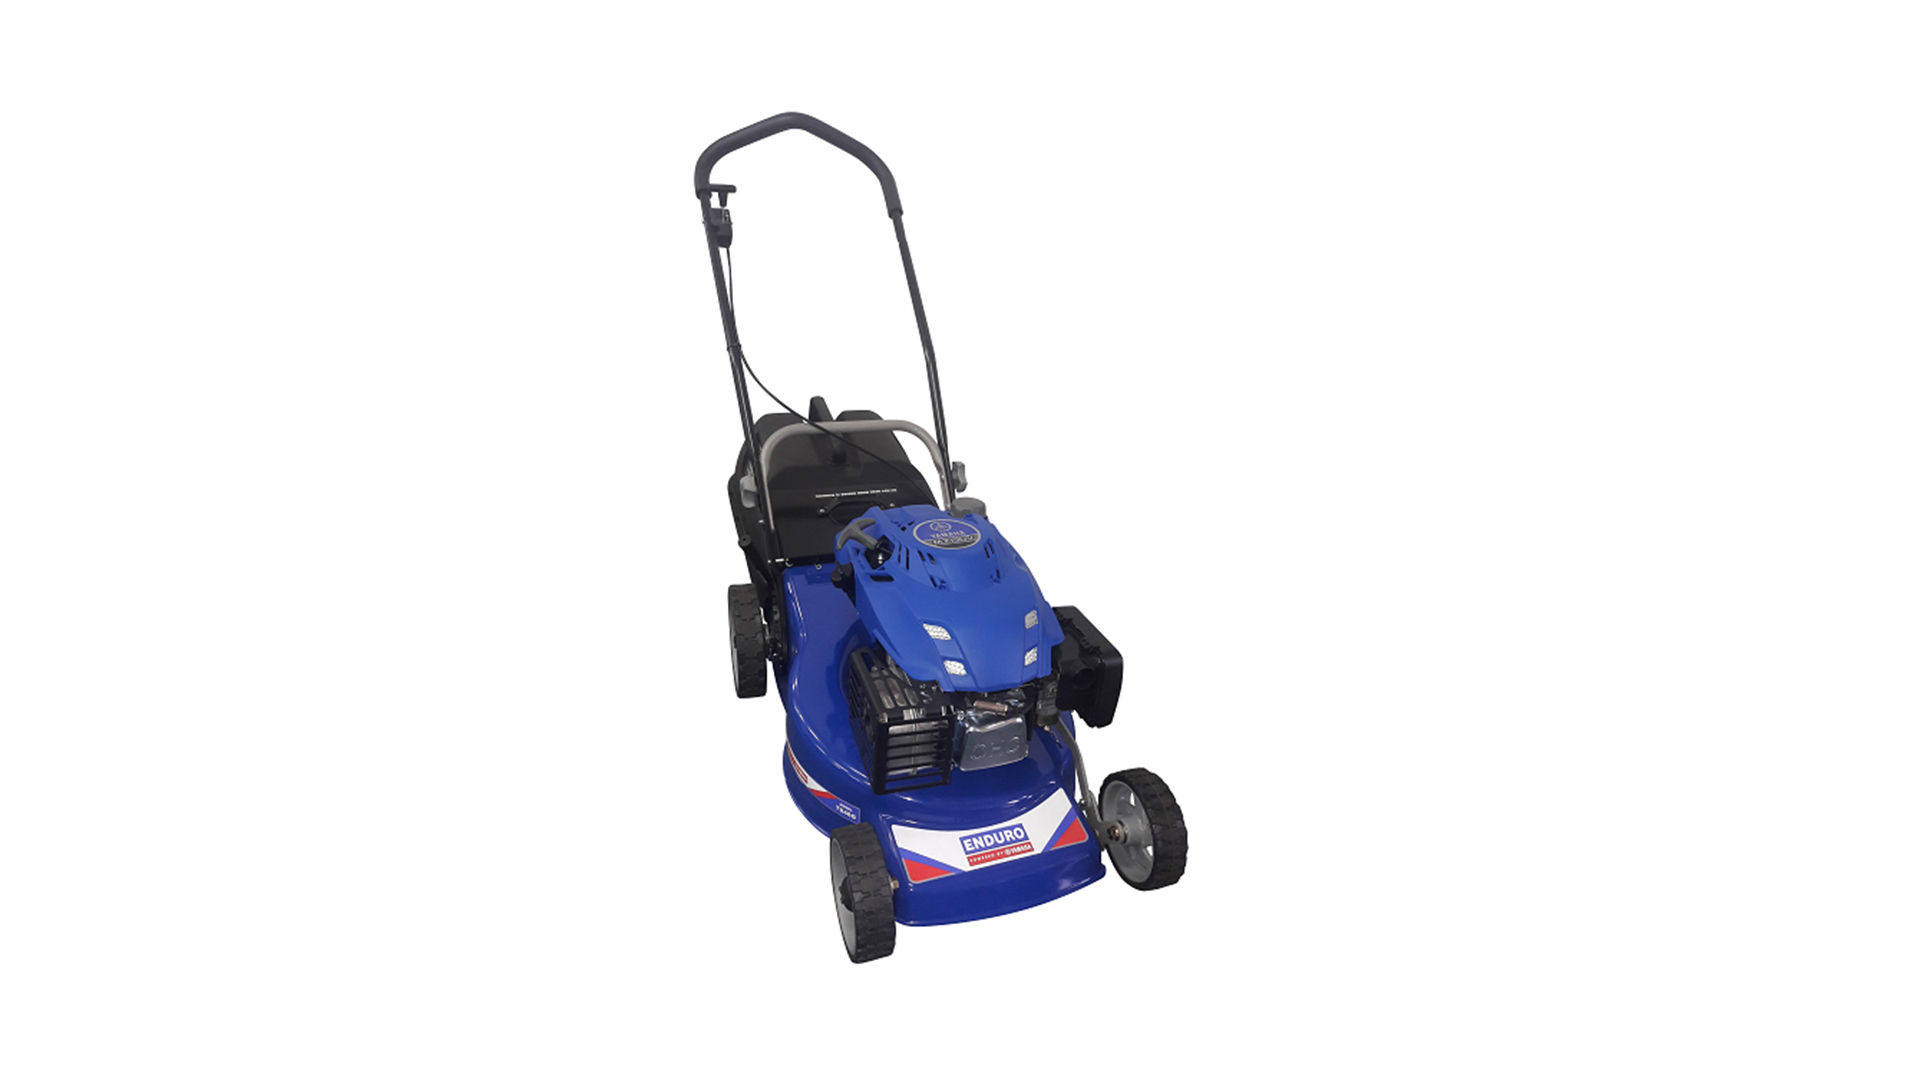 YAMAHA TS46G LAWNMOWERS  - COMMERCIAL INDUSTRIAL ACE:
Suited for large gardens, commercial industrial use for areas greater than 2000m. The TS46UT features the signature Aero-Vac® grass collection system with complimenting three high-vaned swing-back blades on a 460mm disc to reduce spillage, discharging into a 48-litre grass-box.